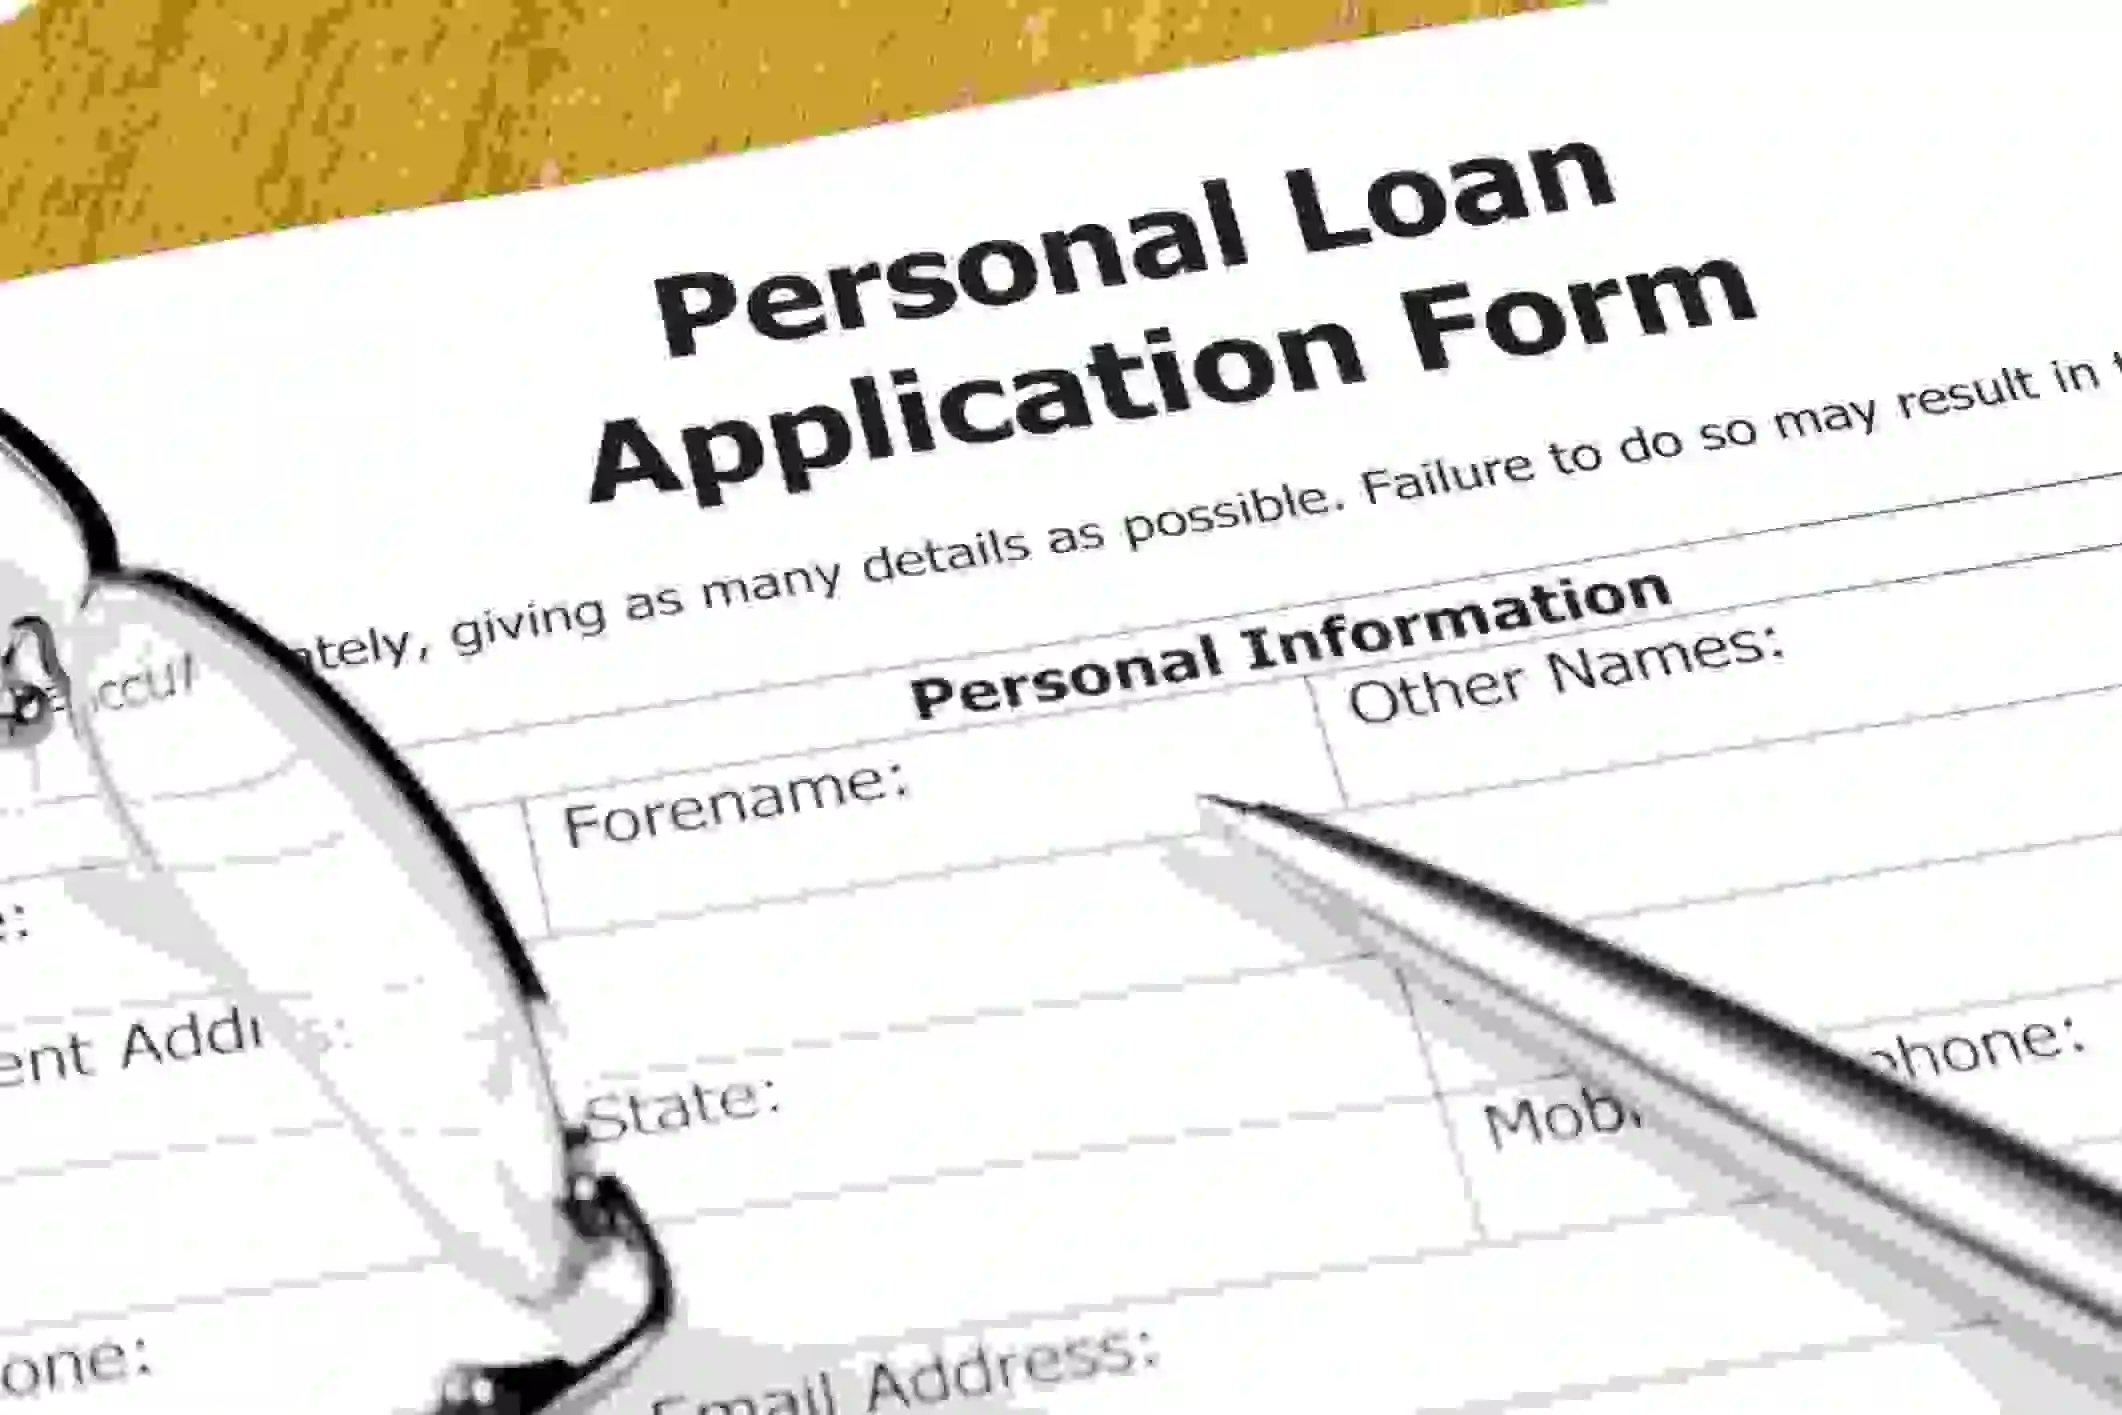 Look Out For a Personal Loan's Online Application Process